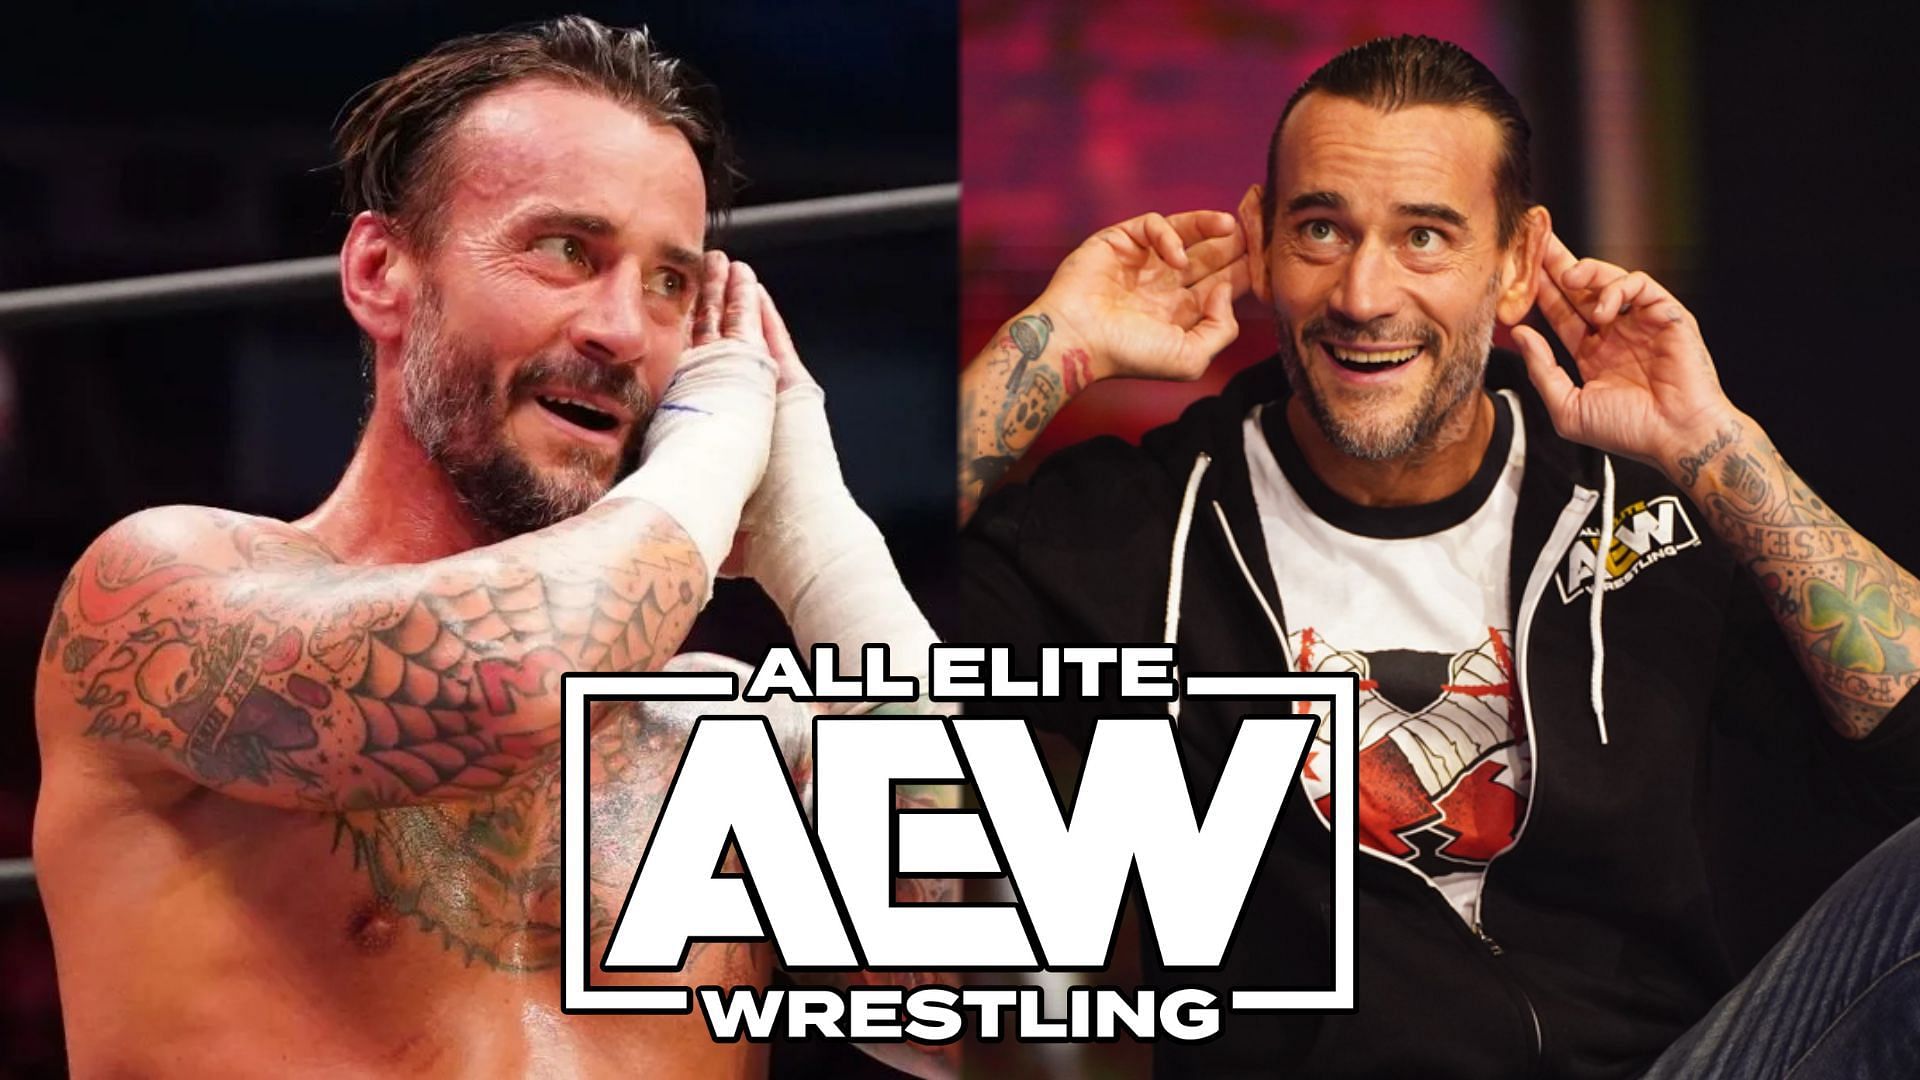 Did CM Punk have ulterior motives for the shots he took at this AEW star?